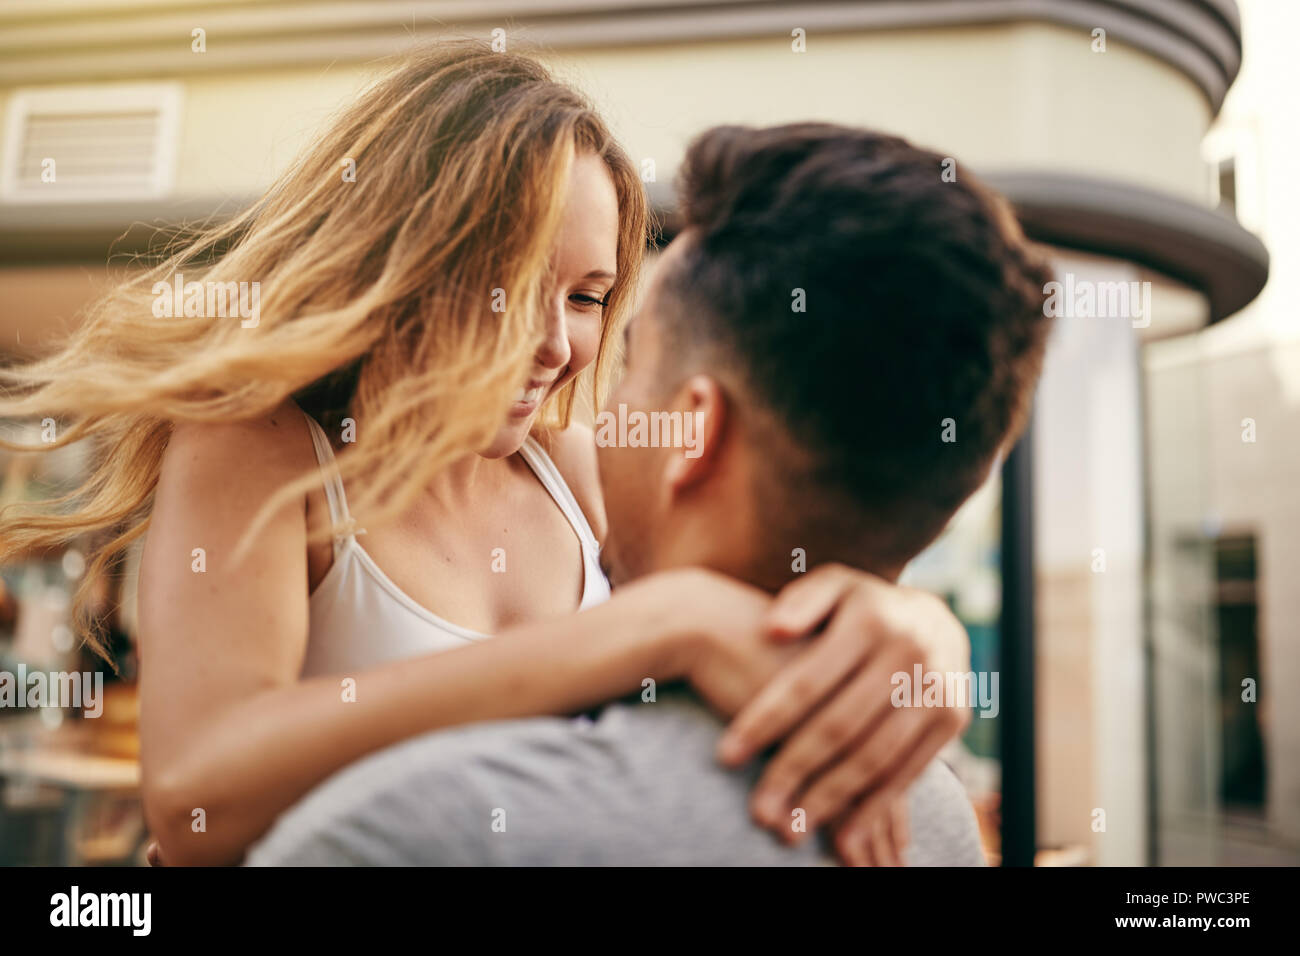 Young couple hugging and looking into each other's eyes while sharing a romantic moment on a street in the city Stock Photo